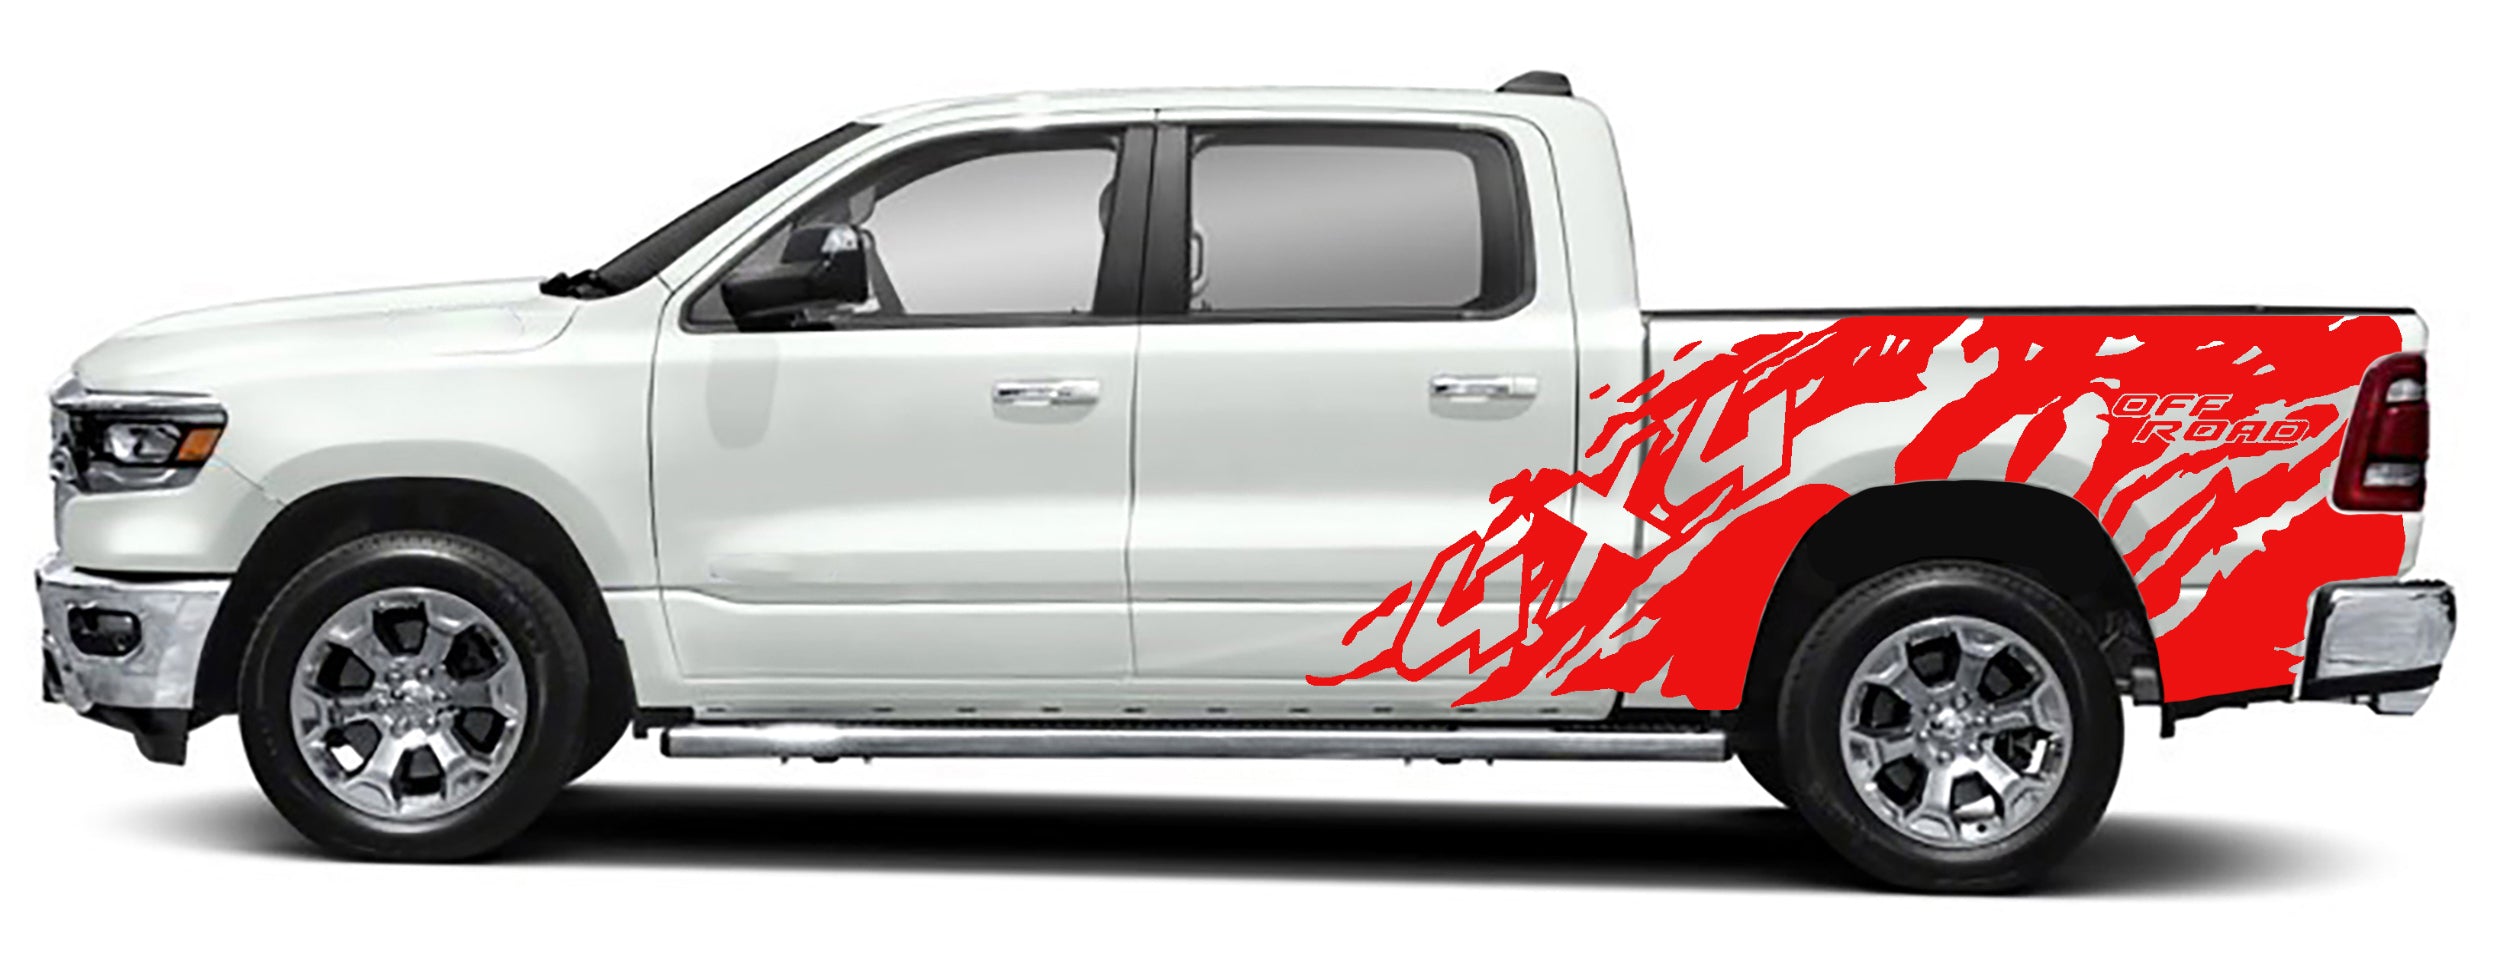 4x4 off road side graphics for dodge ram 1500 2500 2019 to 2023 models red